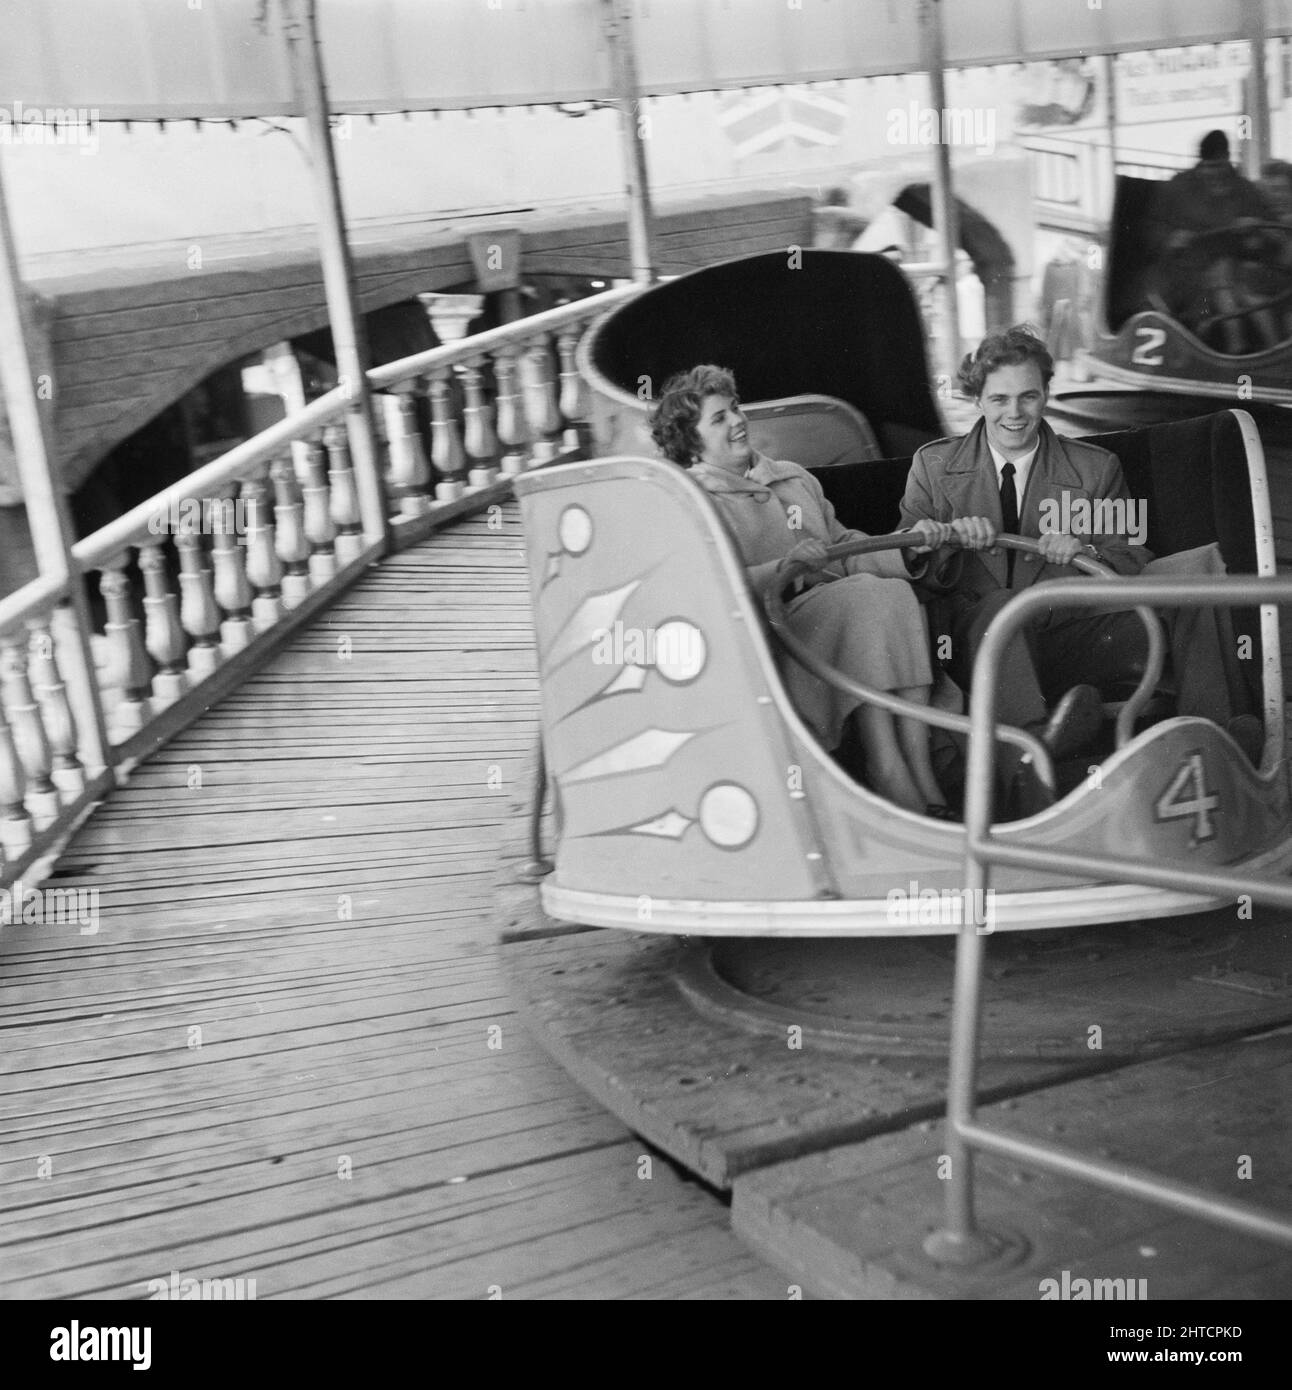 Skegness, East Lindsey, Lincolnshire, 22/05/1954. A man and a woman riding on a waltzer during a Laing staff trip to Skegness. In 1947, after a seven year break, Laing had resurrected their 'Area Outings' for staff and their families, with trips taking place in May and June. In 1954, there were seven outings planned to take place over five weeks in May and June. This trip to Skegness was for employees and their families from the Midlands and South Yorkshire. Stock Photo